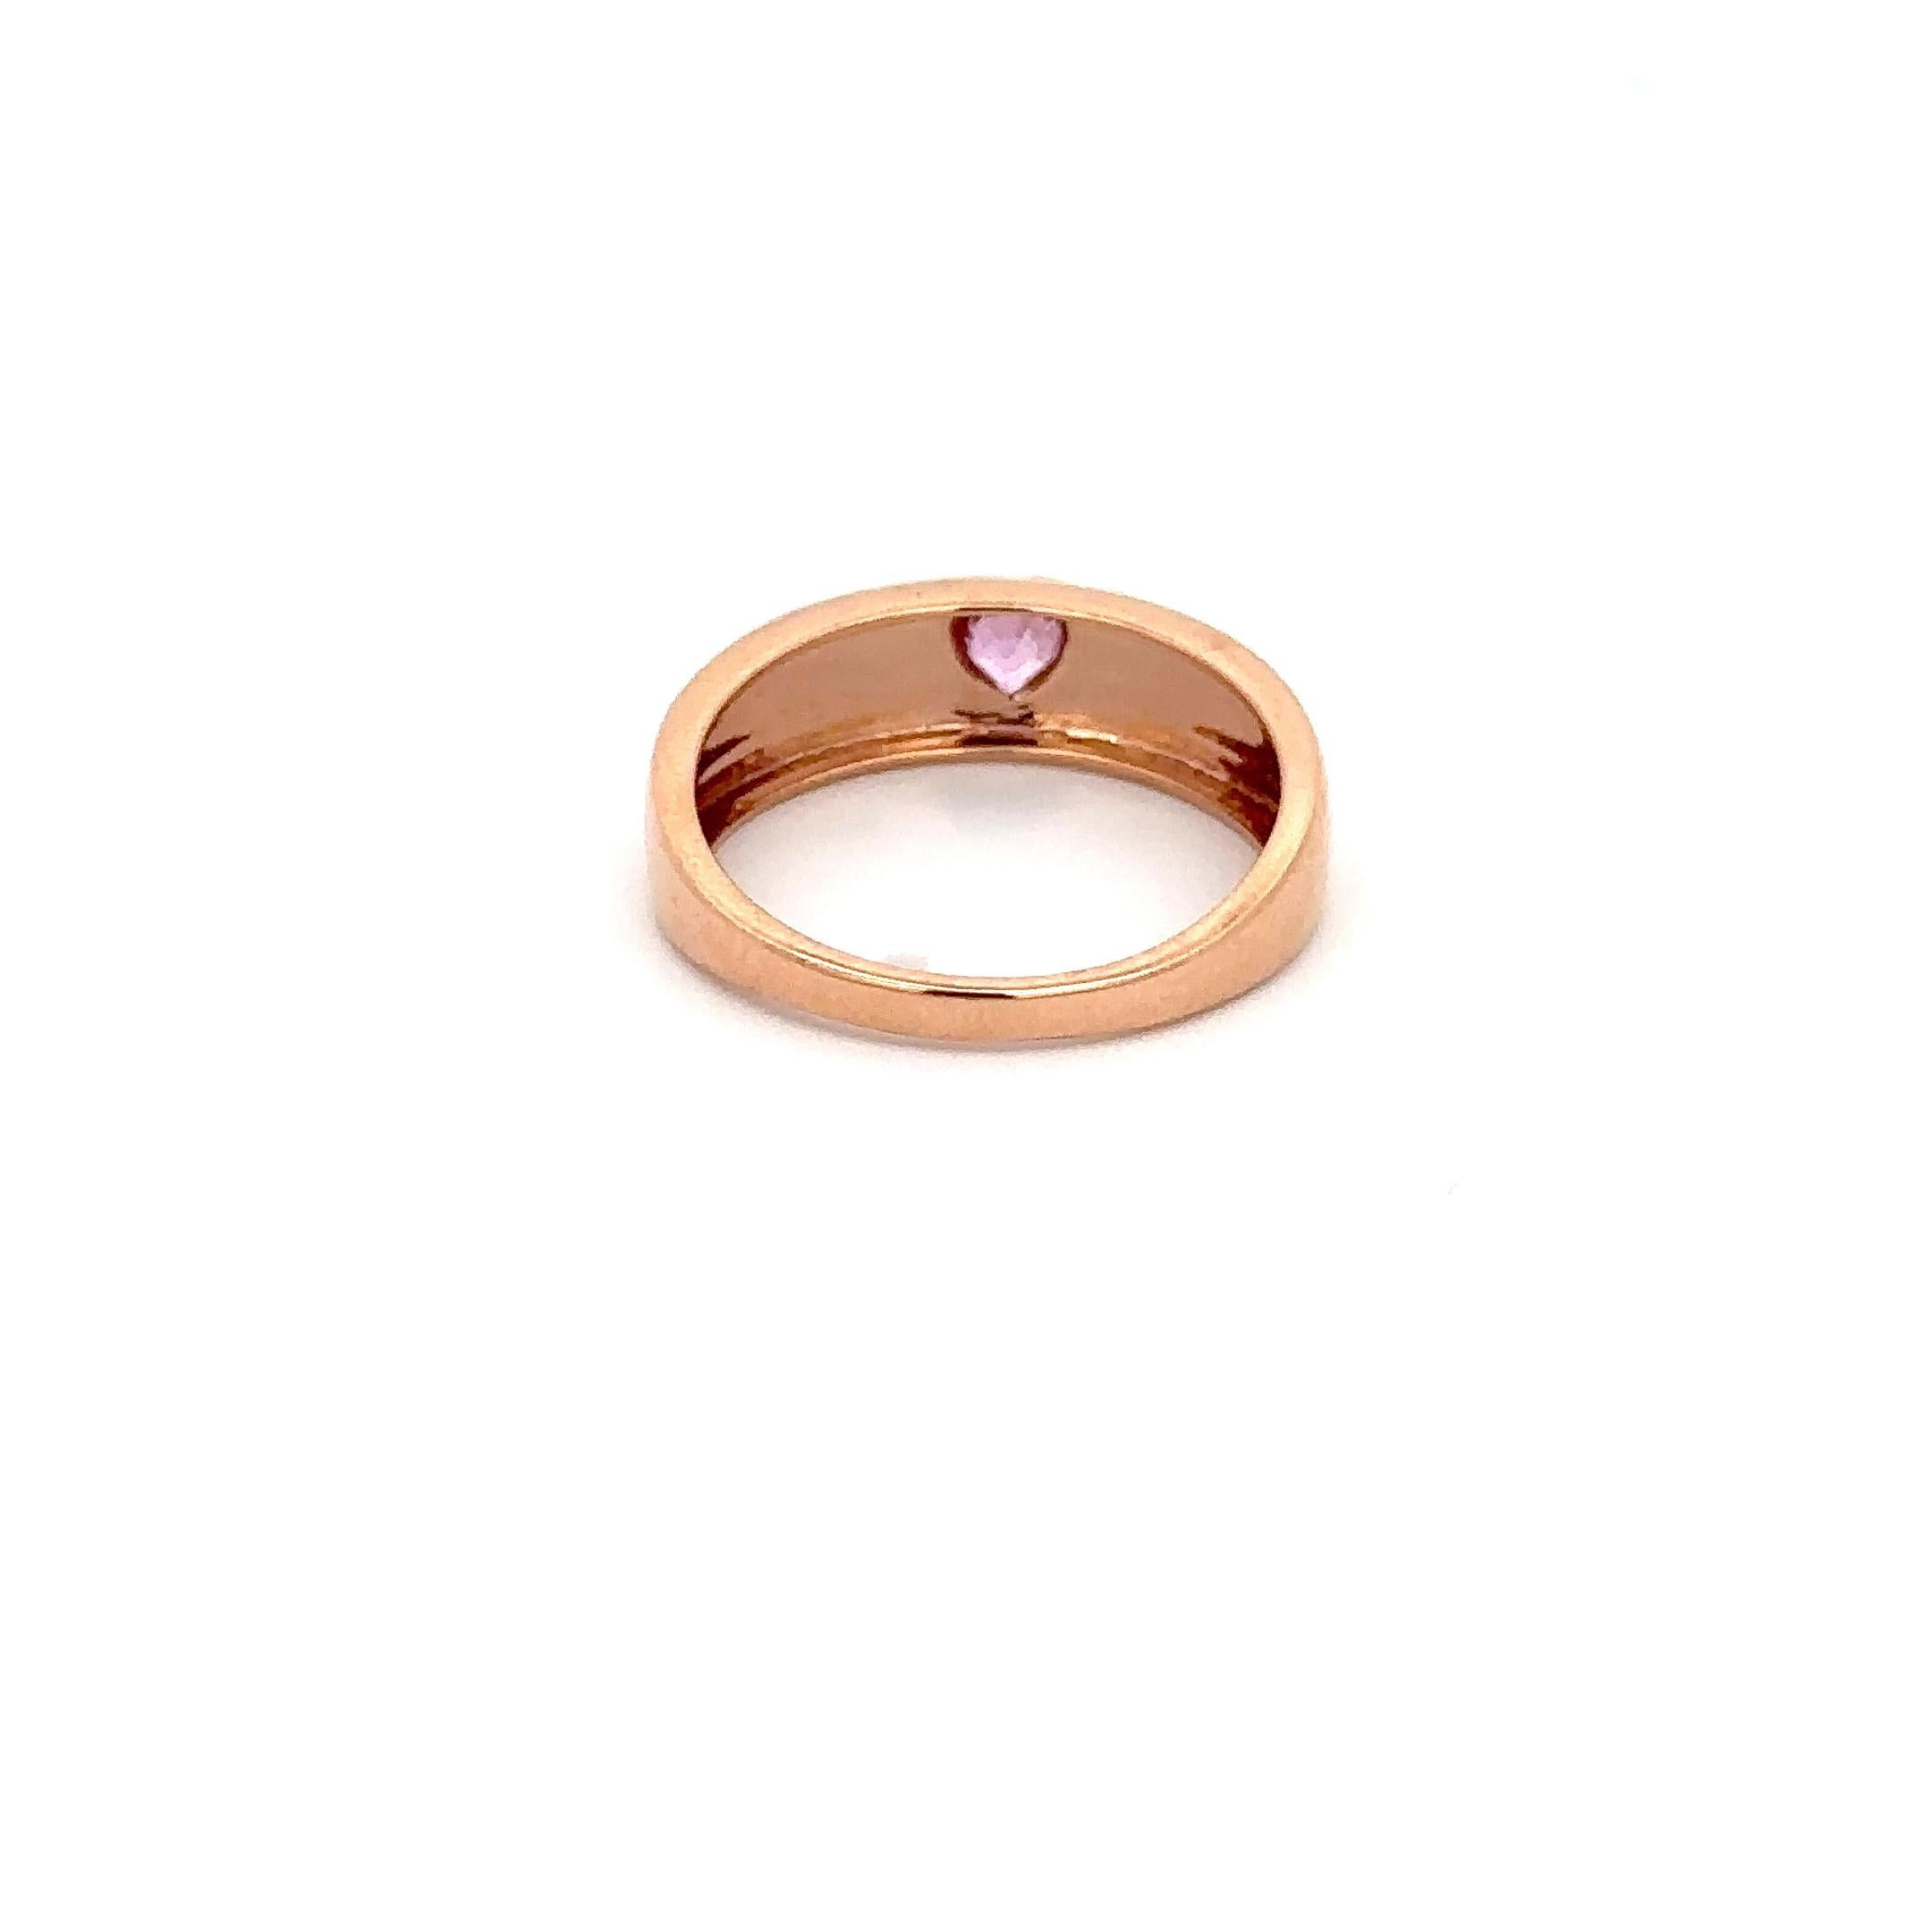 For Sale:  18k Solid Rose Gold Signet Ring Dainty Heart Cut Pink Sapphire Pinky Ring  9